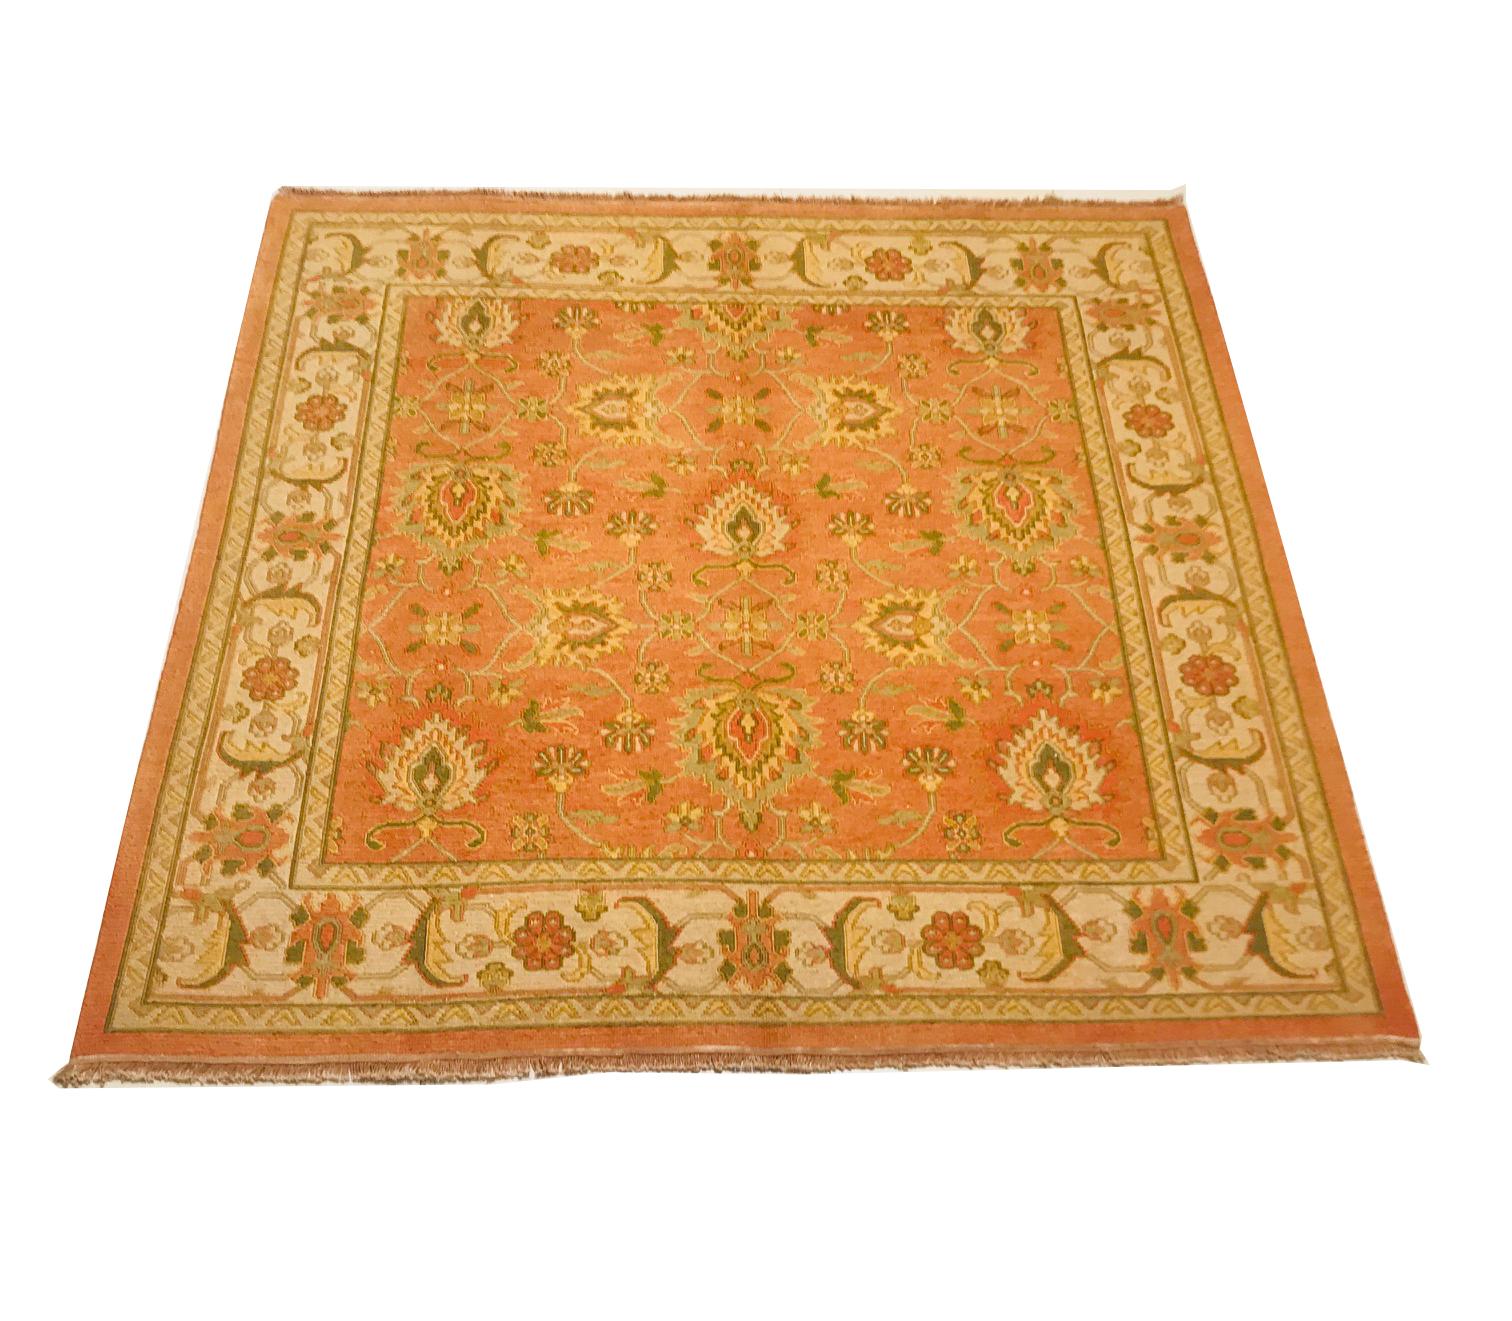 This rug is from the 1980s, hand knotted with wool.
This set of carpet has geometric drawings, gives off a combination of soft colors such as orange, beige and olive green that makes it a perfect piece to decorate a corner of our home.